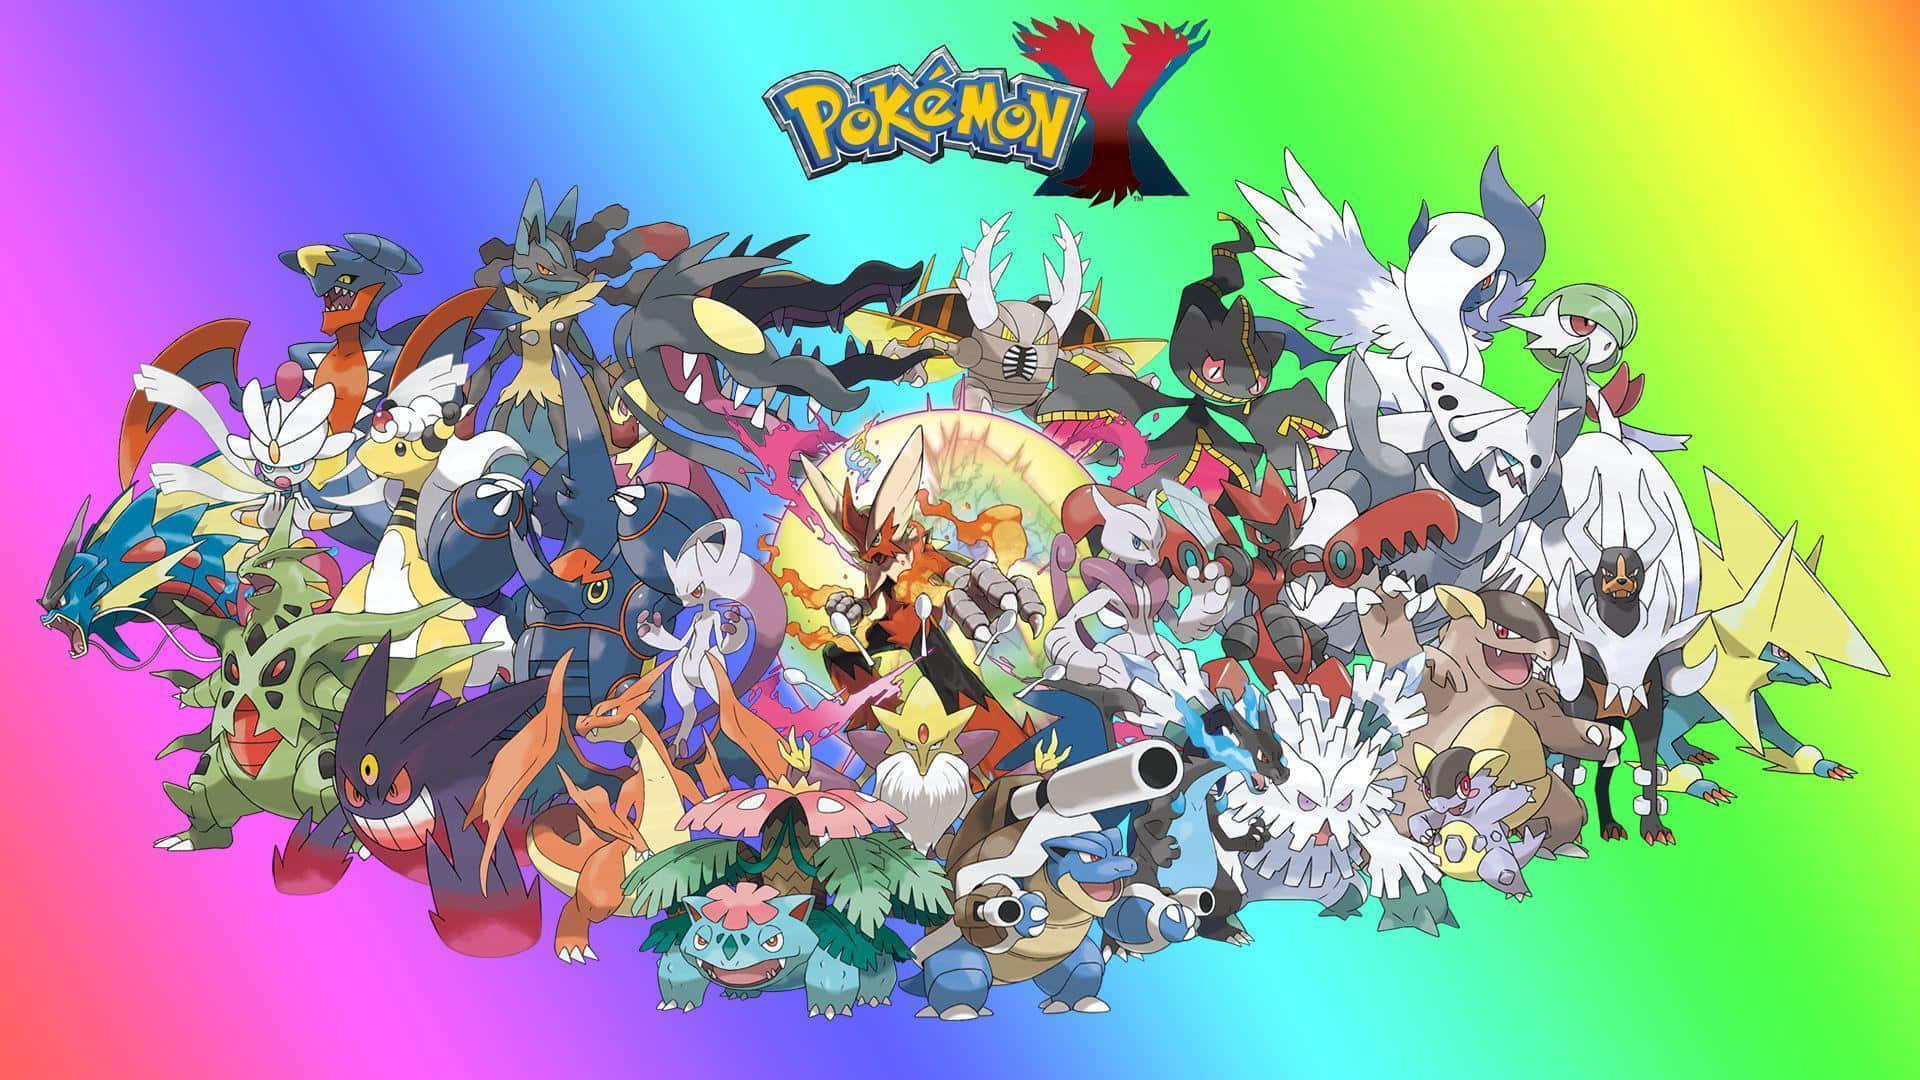 All Legendary Pokemon Together in One Epic Adventure Wallpaper